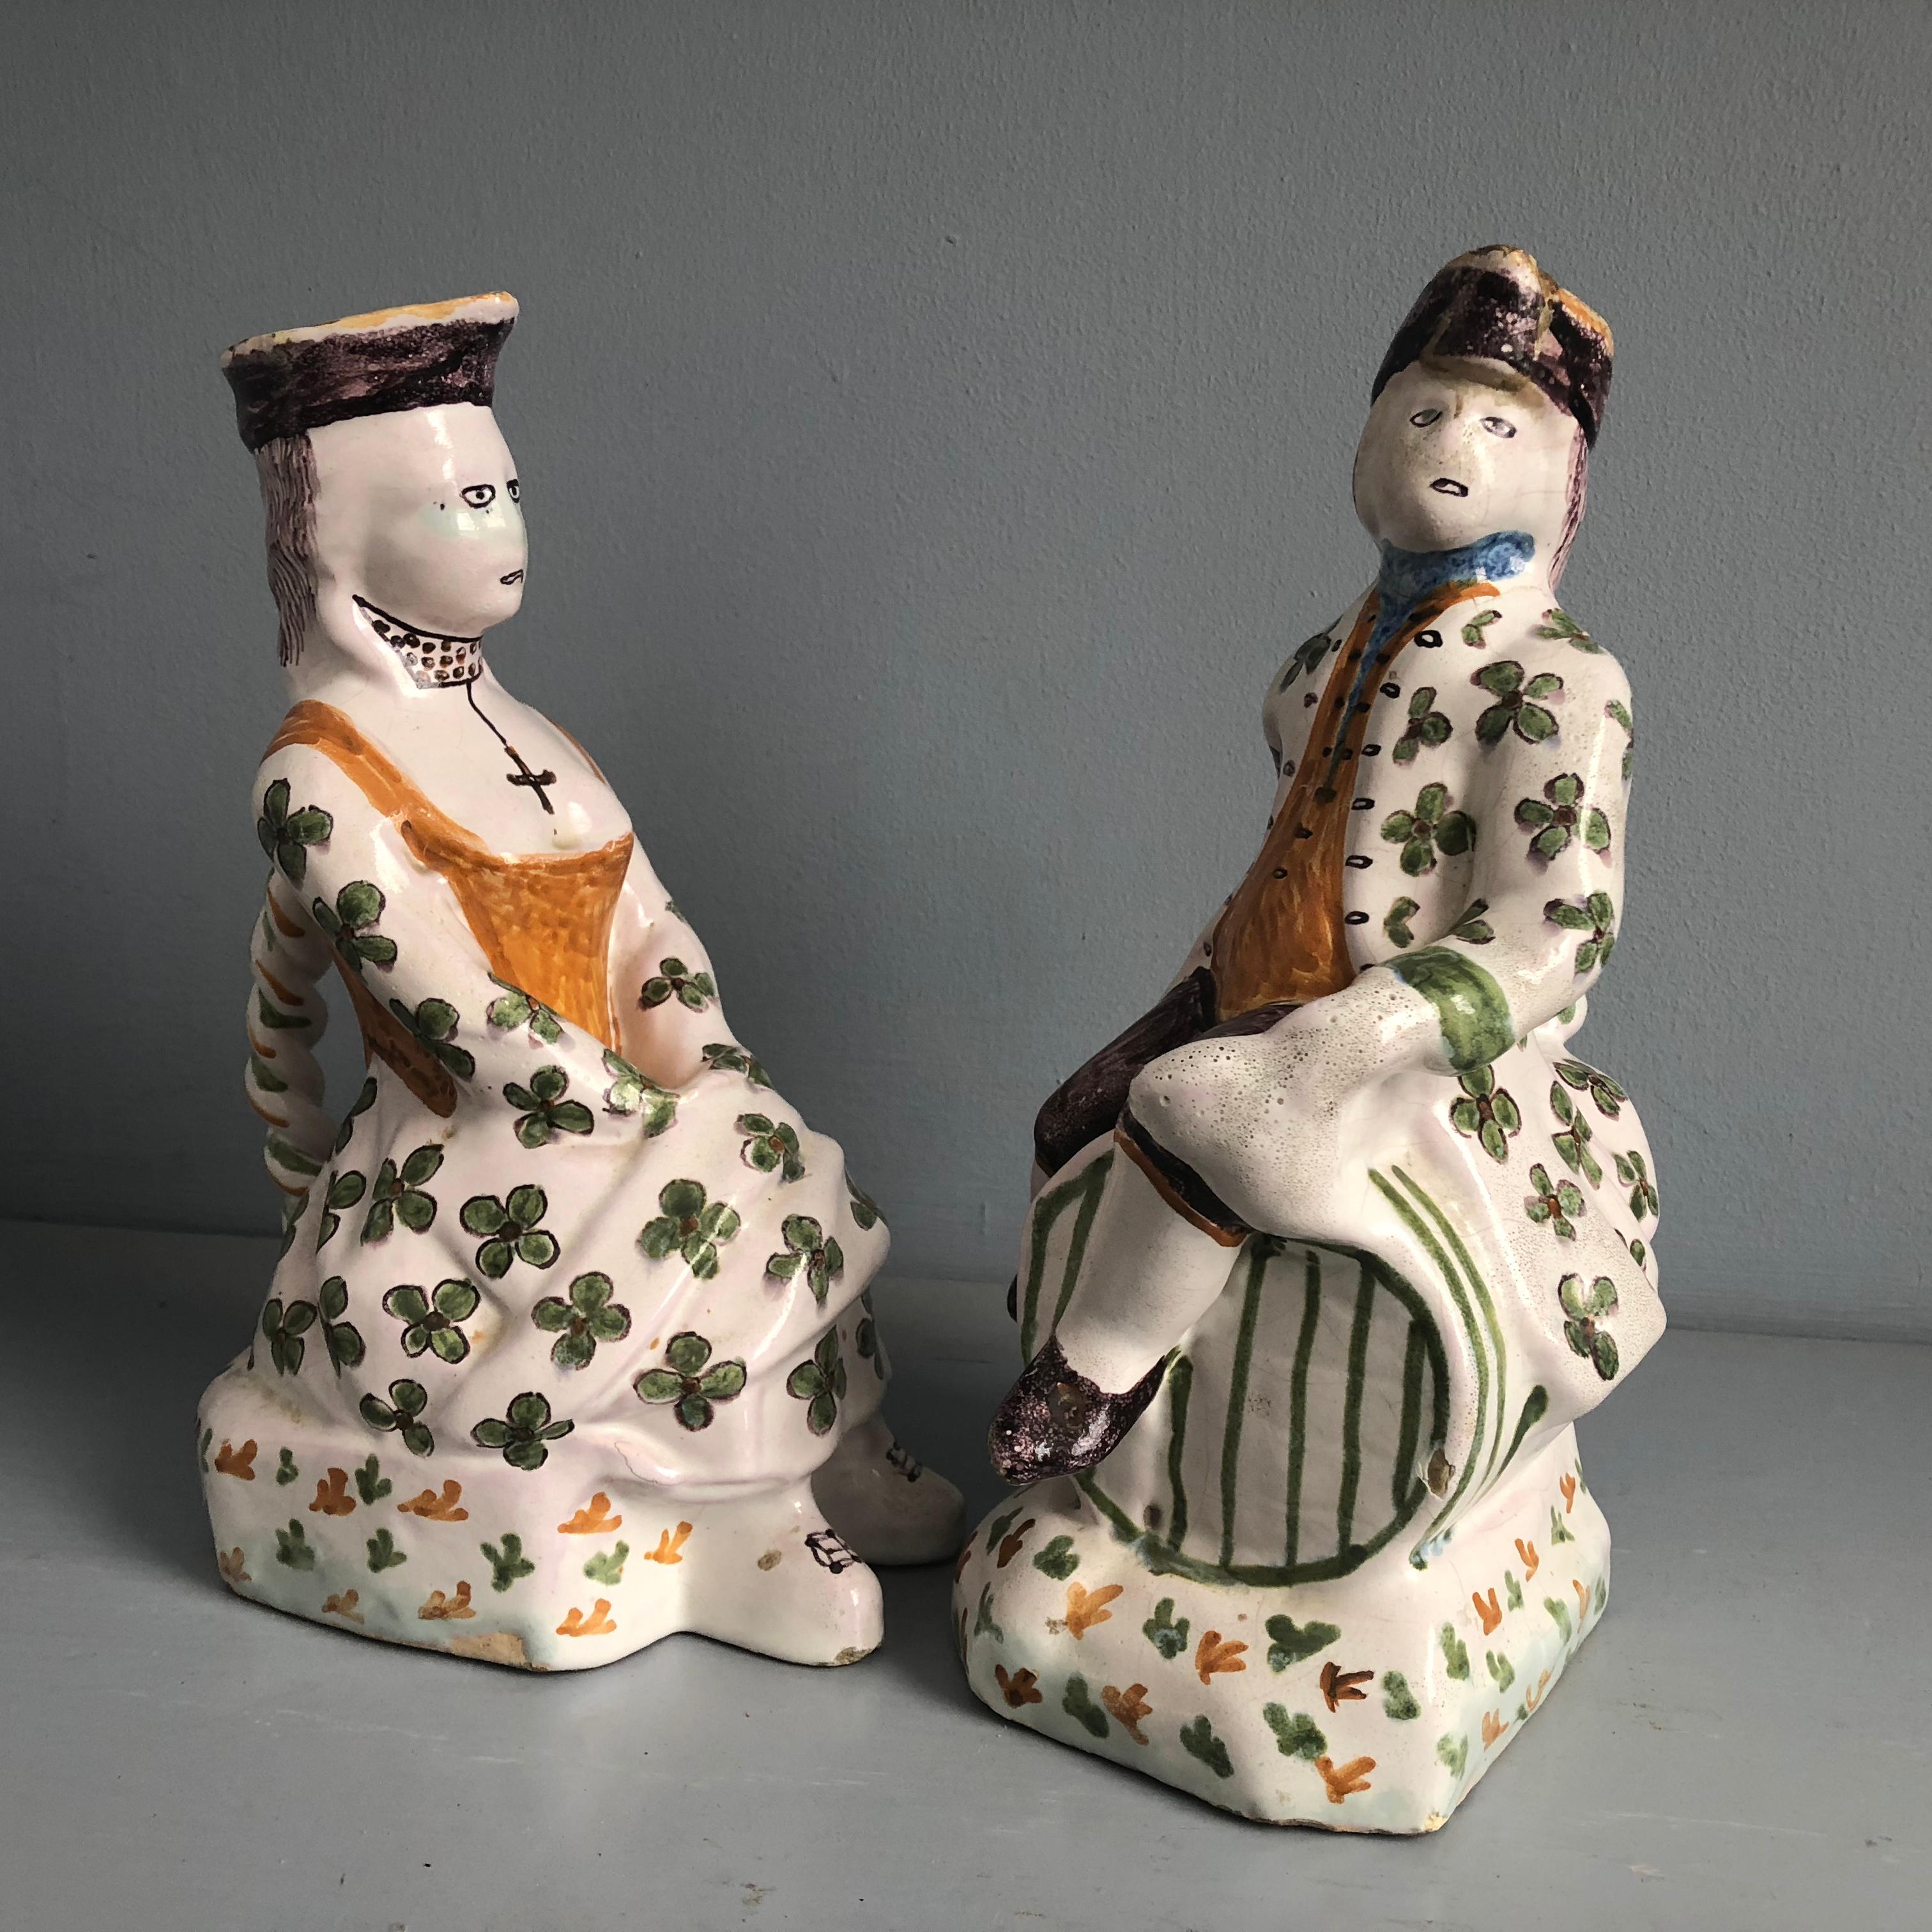 A charming pair of Faience pitchers, French Provincial late 19th century, depicting an 18th century man and a woman seated, their matching caps forming the spouts, both decorated with green clovers and other details over a white glaze. Each have a